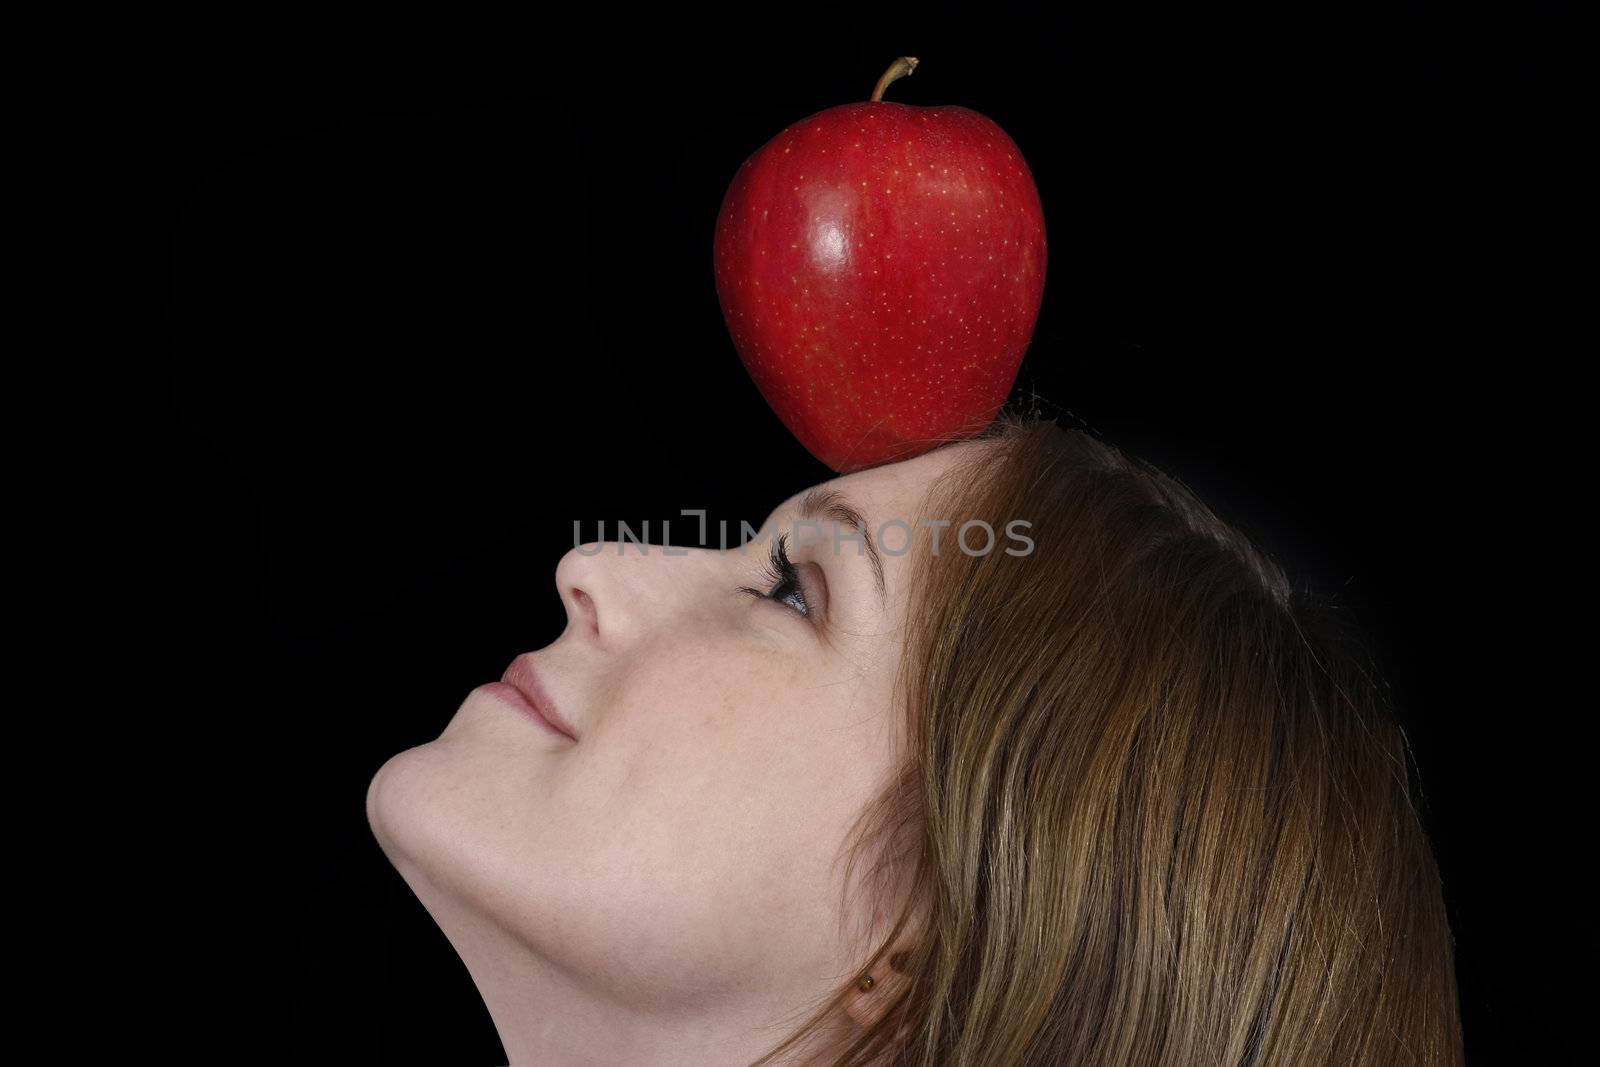 Profil of a red apple